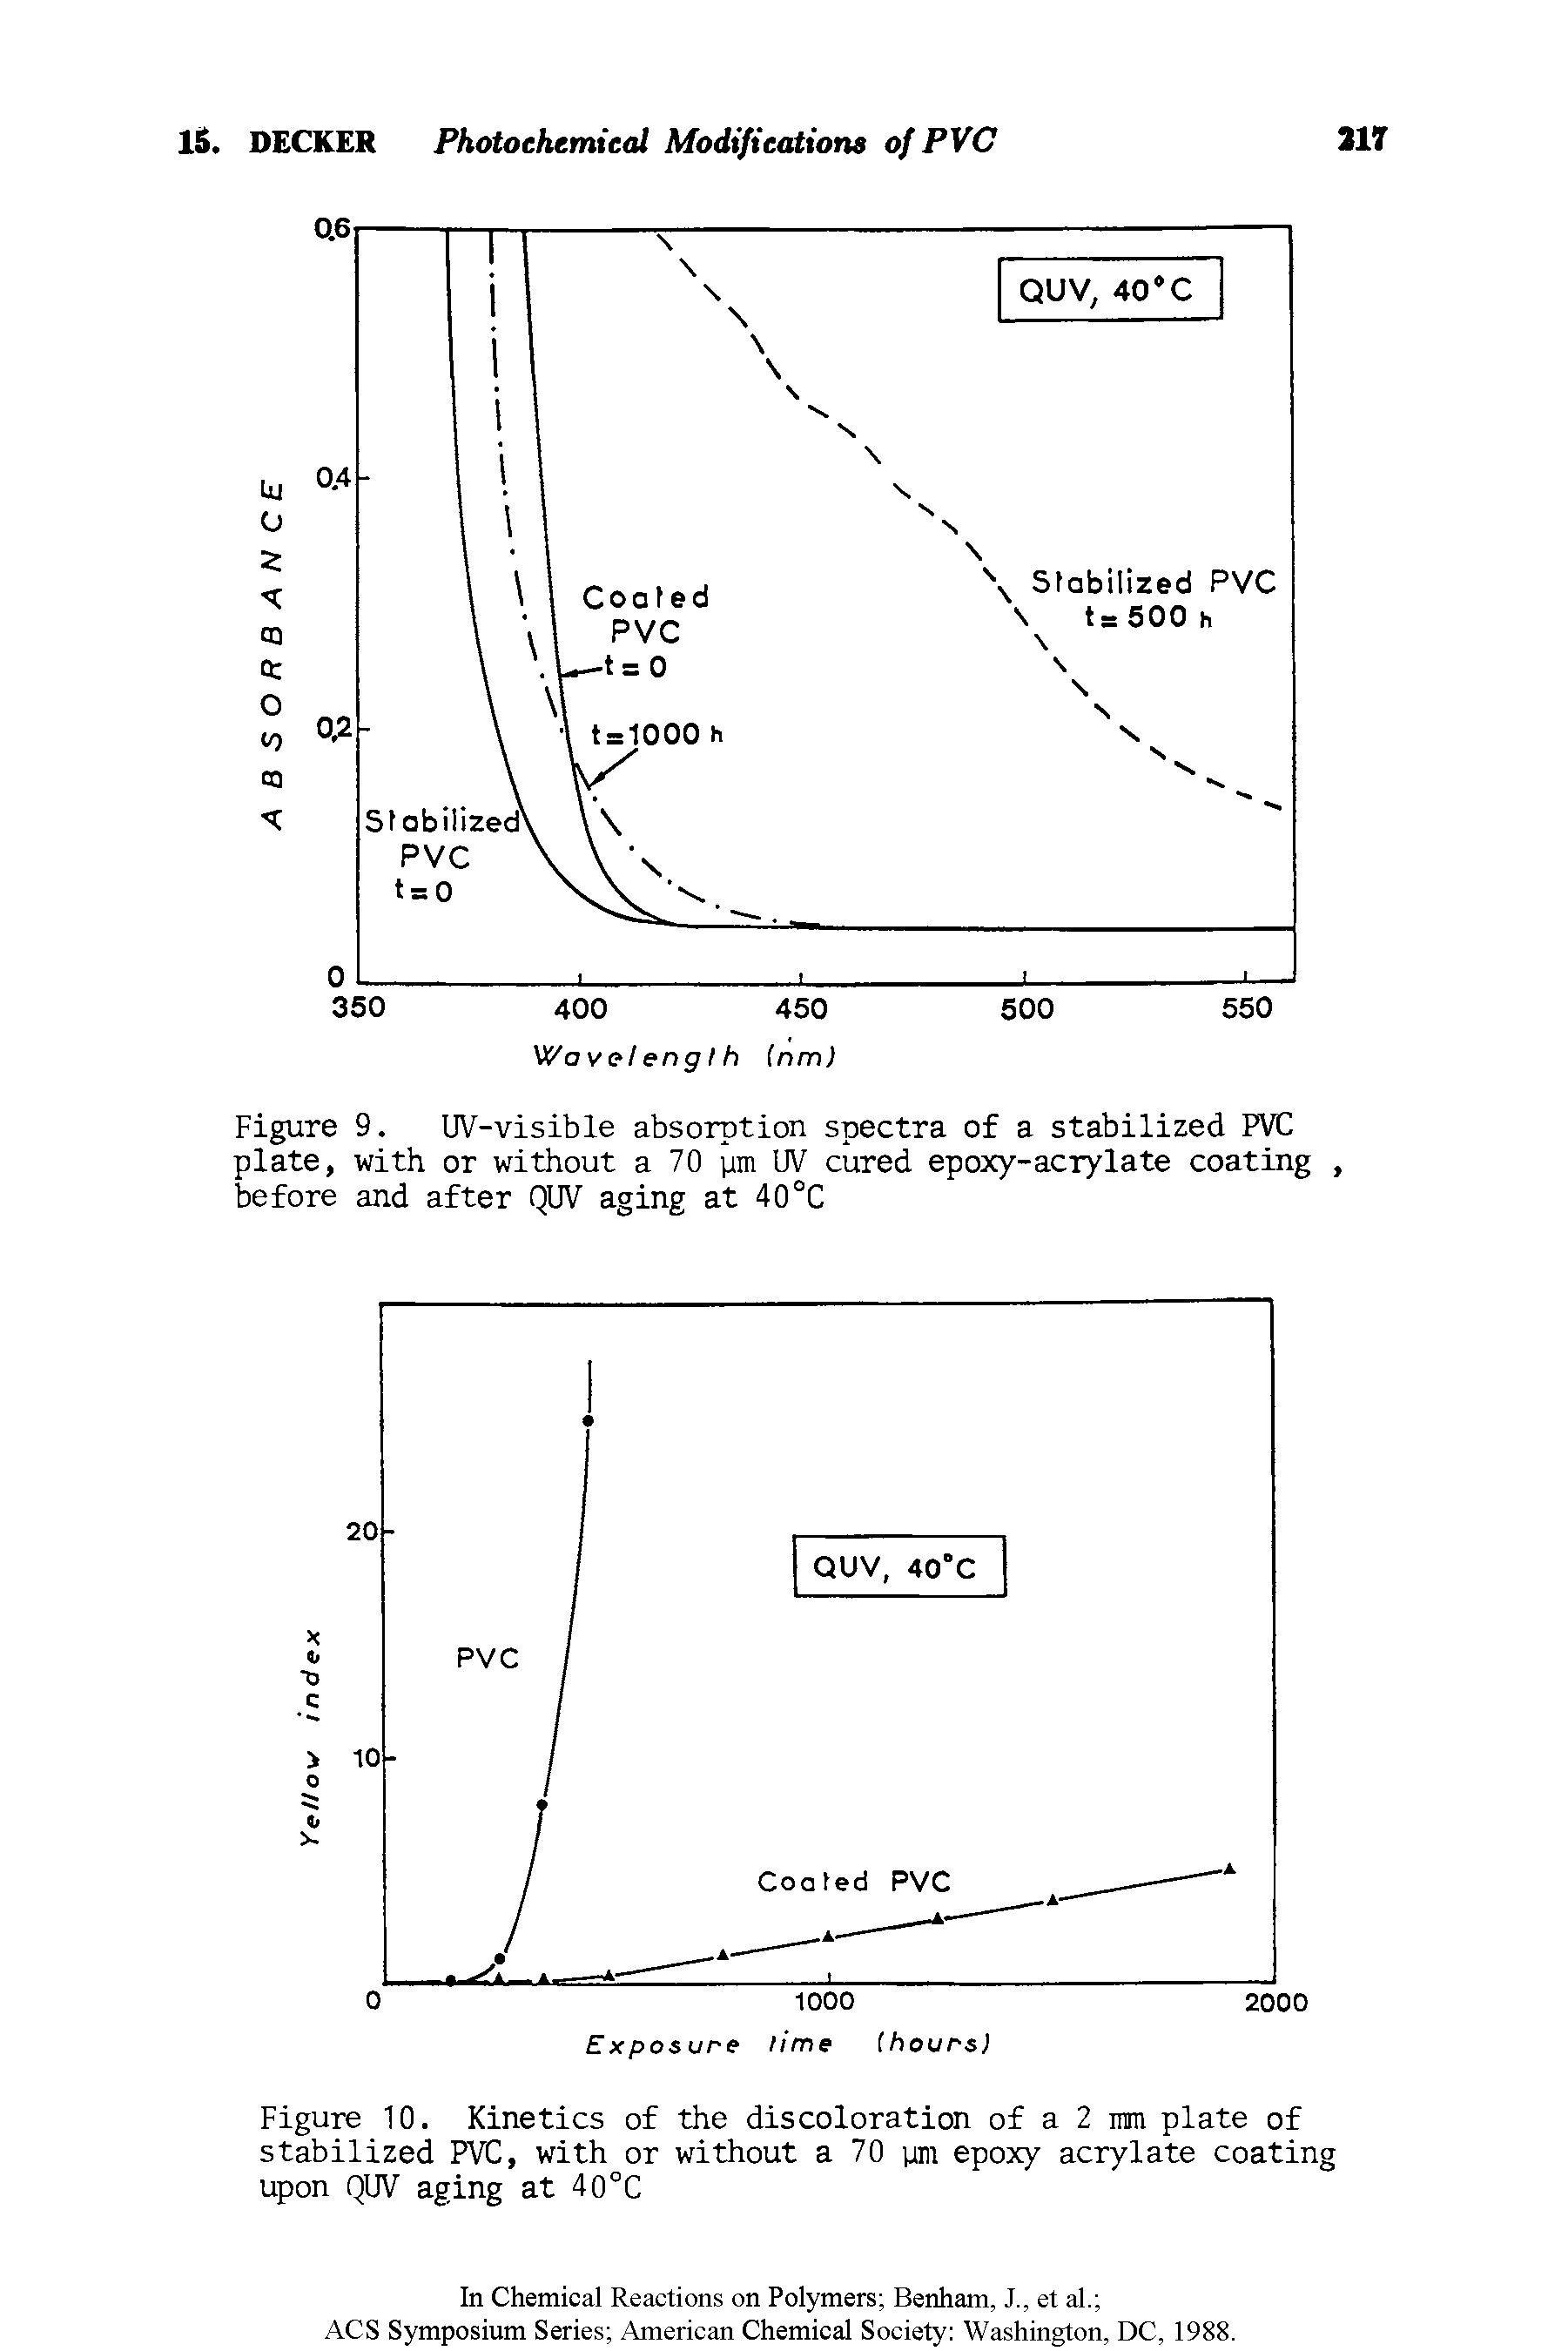 Figure 10. Kinetics of the discoloration of a 2 mm plate of stabilized PVC, with or without a 70 ym epoxy acrylate coating upon QUV aging at 40°C...